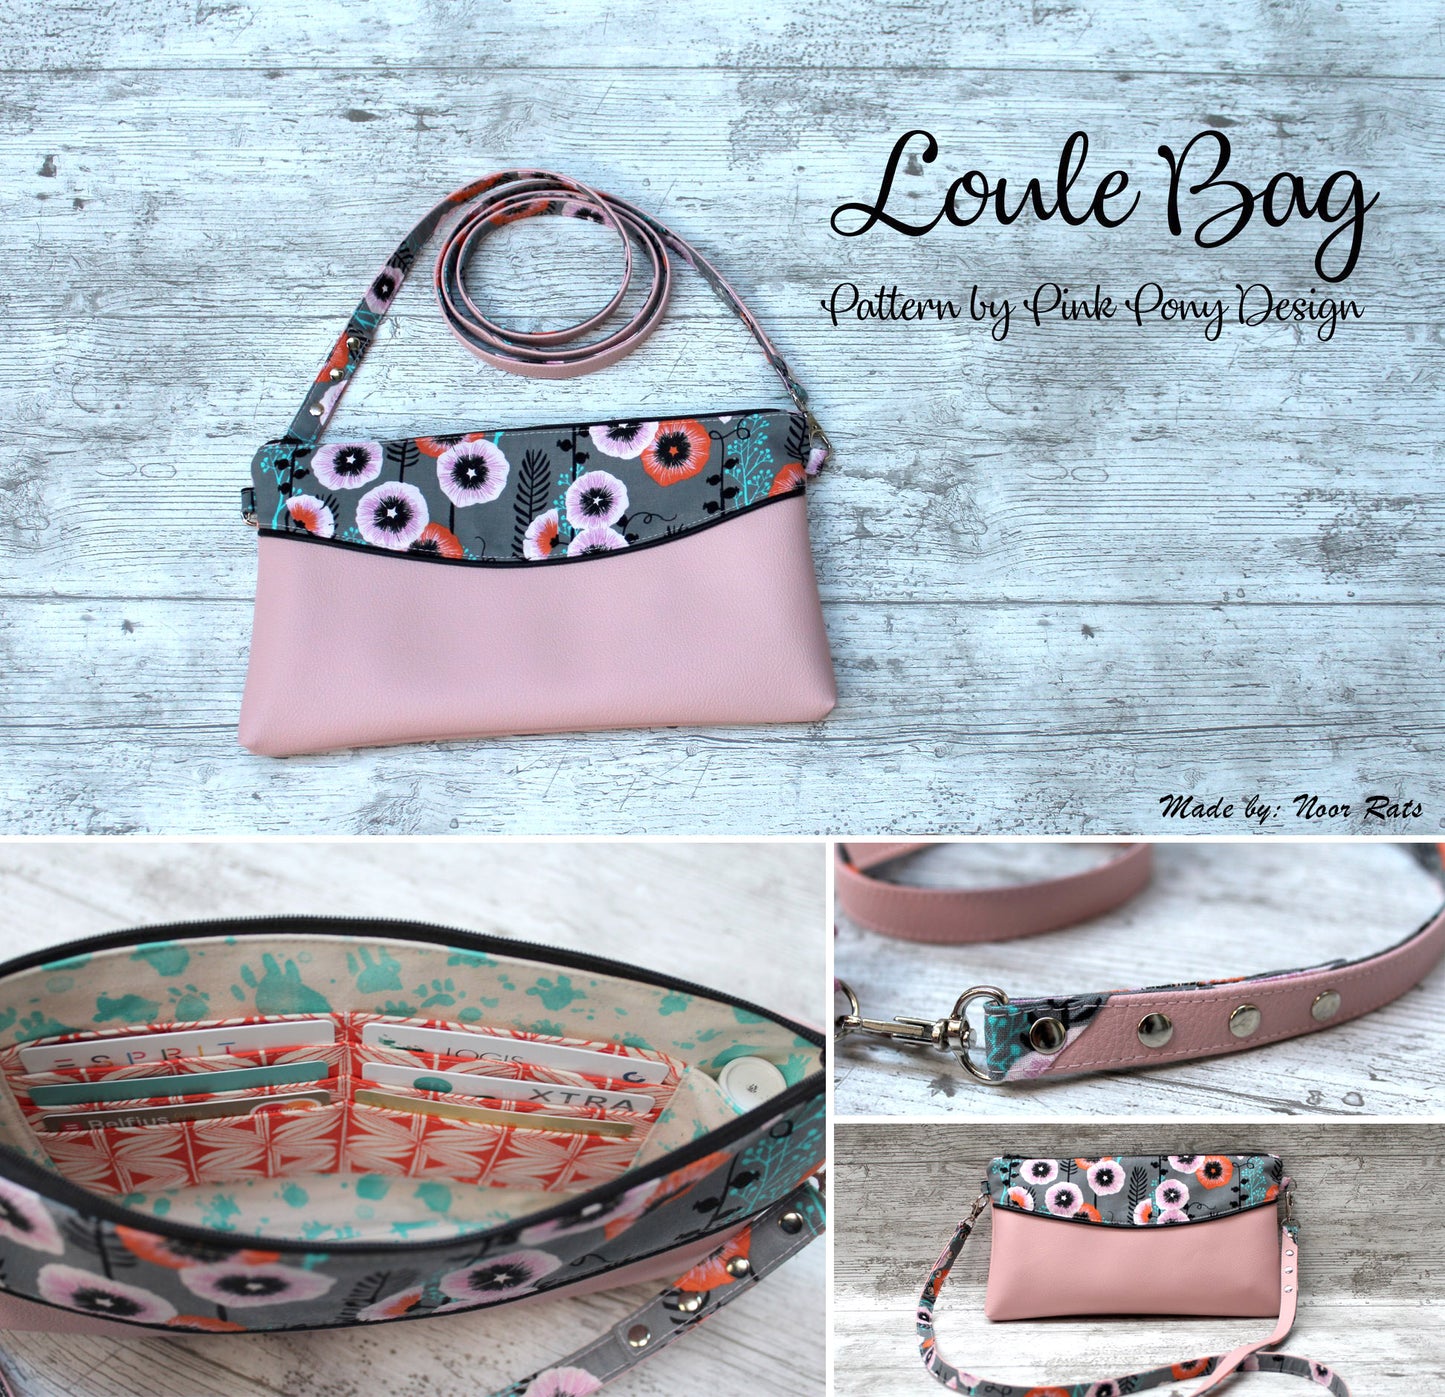 Loule Bag PDF sewing pattern sewn in vinyl and cotton, crossbody bag with metal zipper piping.